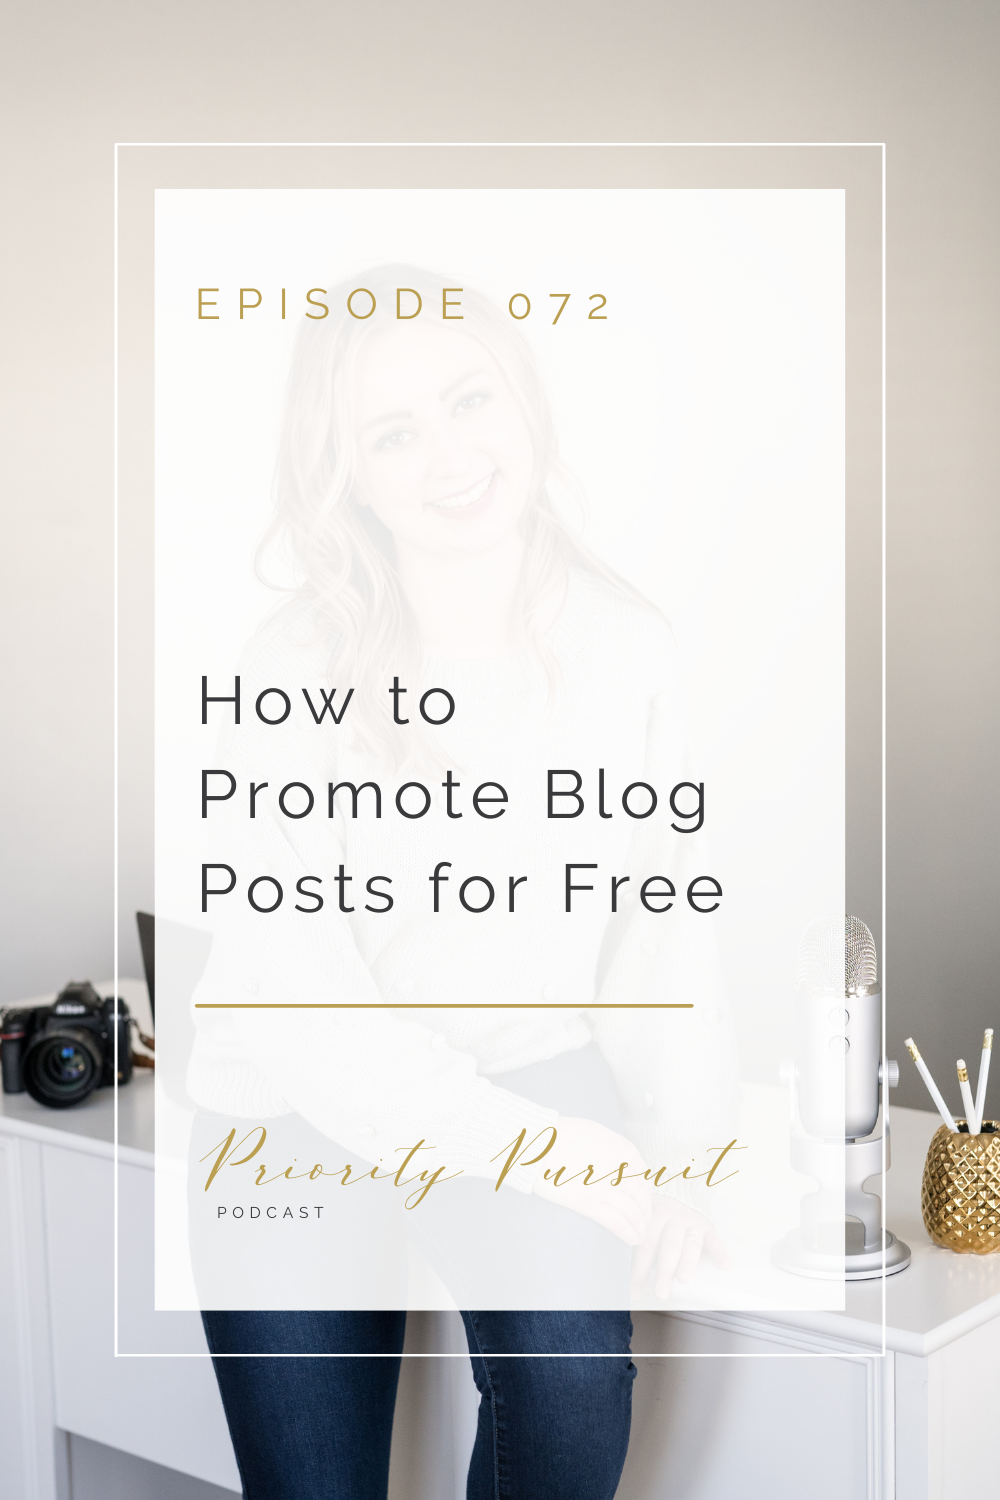 Did you enjoy this episode? If so, pin it to save it for later! Follow me on Pinterest for more marketing, business, branding, and boundary-setting strategies!